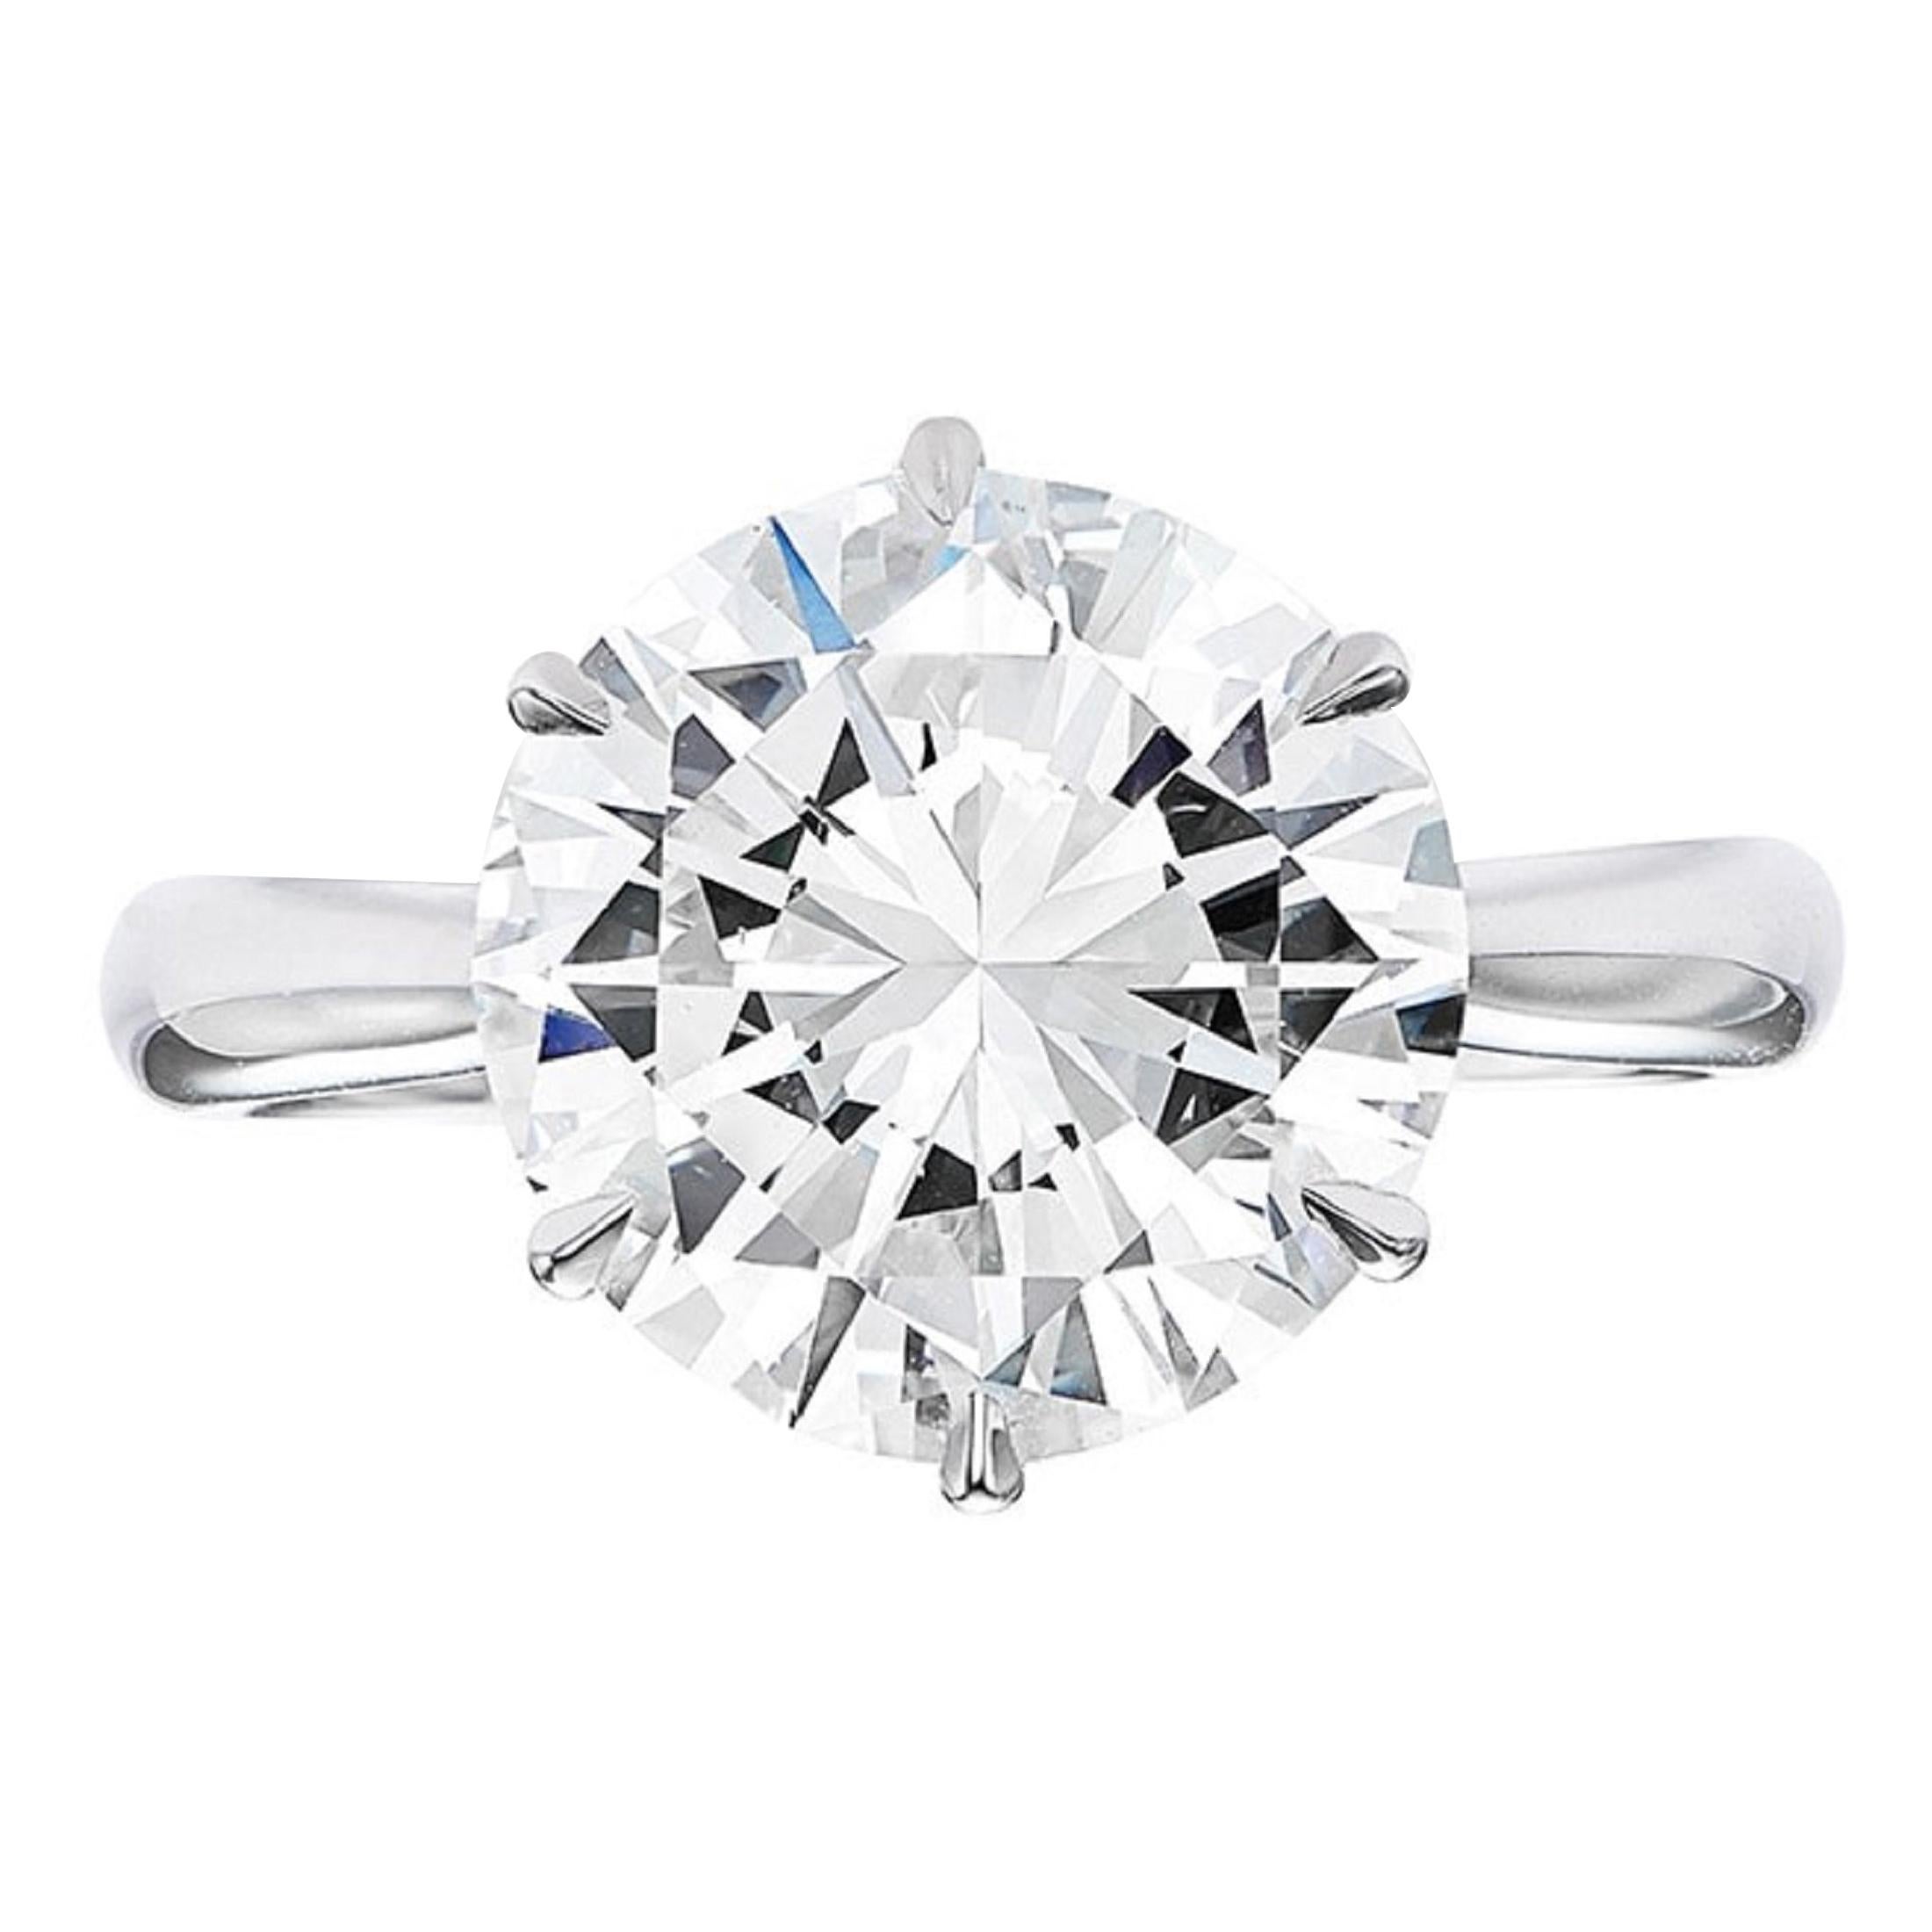 FLAWLESS GIA Certified 3 Carat Round Brilliant Cut Diamond Ring